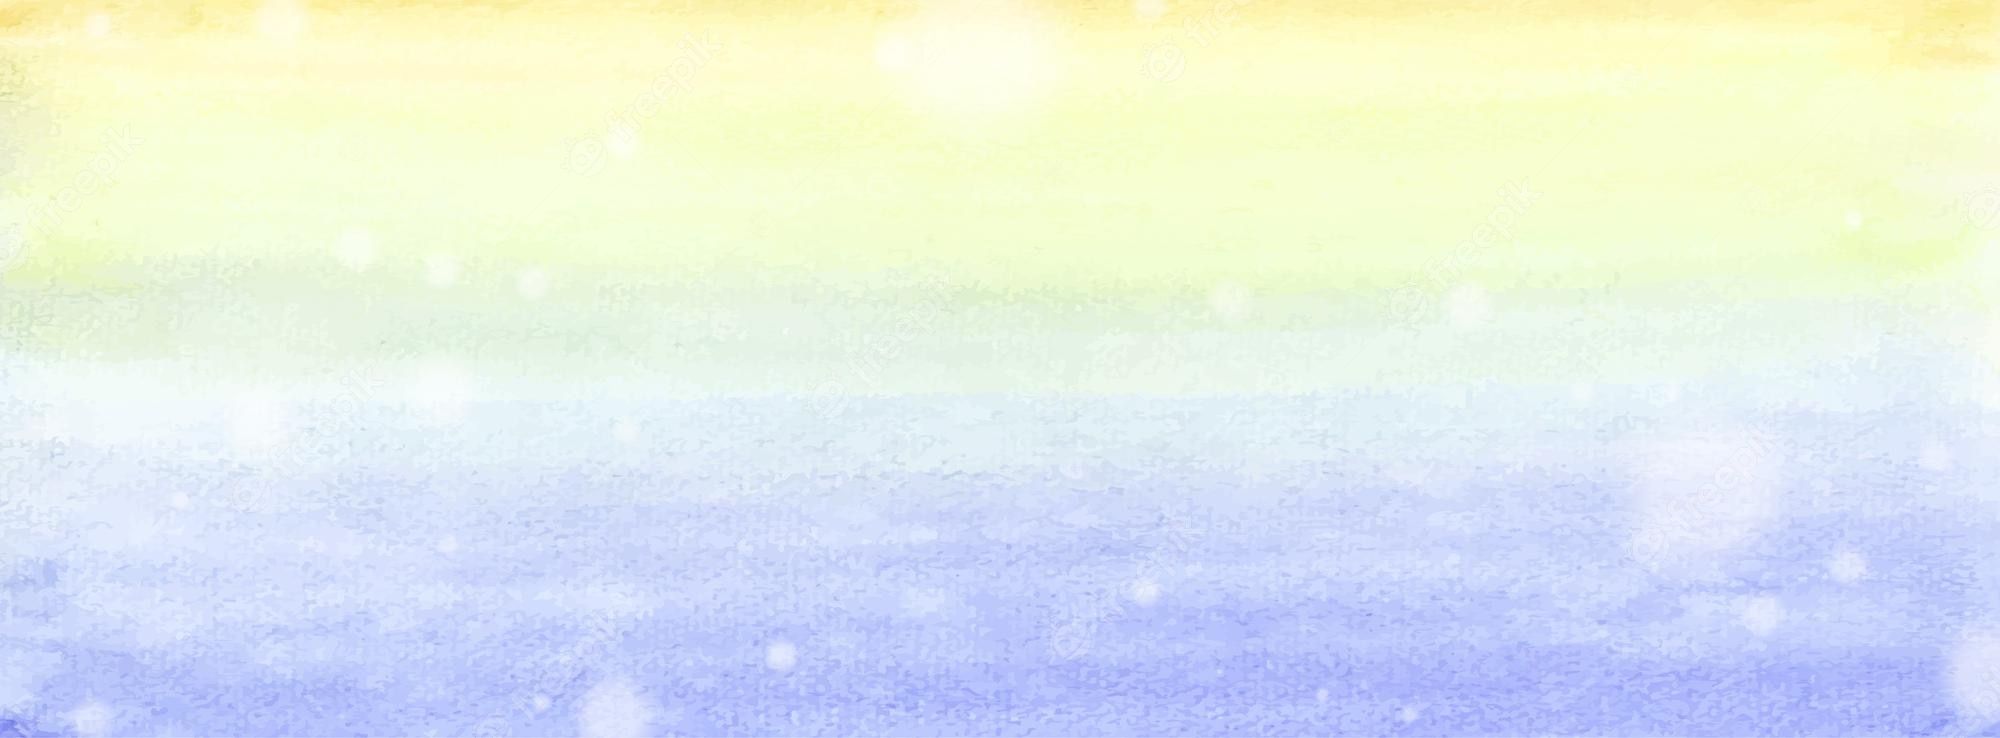 A gradient of blue, green, and yellow watercolor paint - Pastel yellow